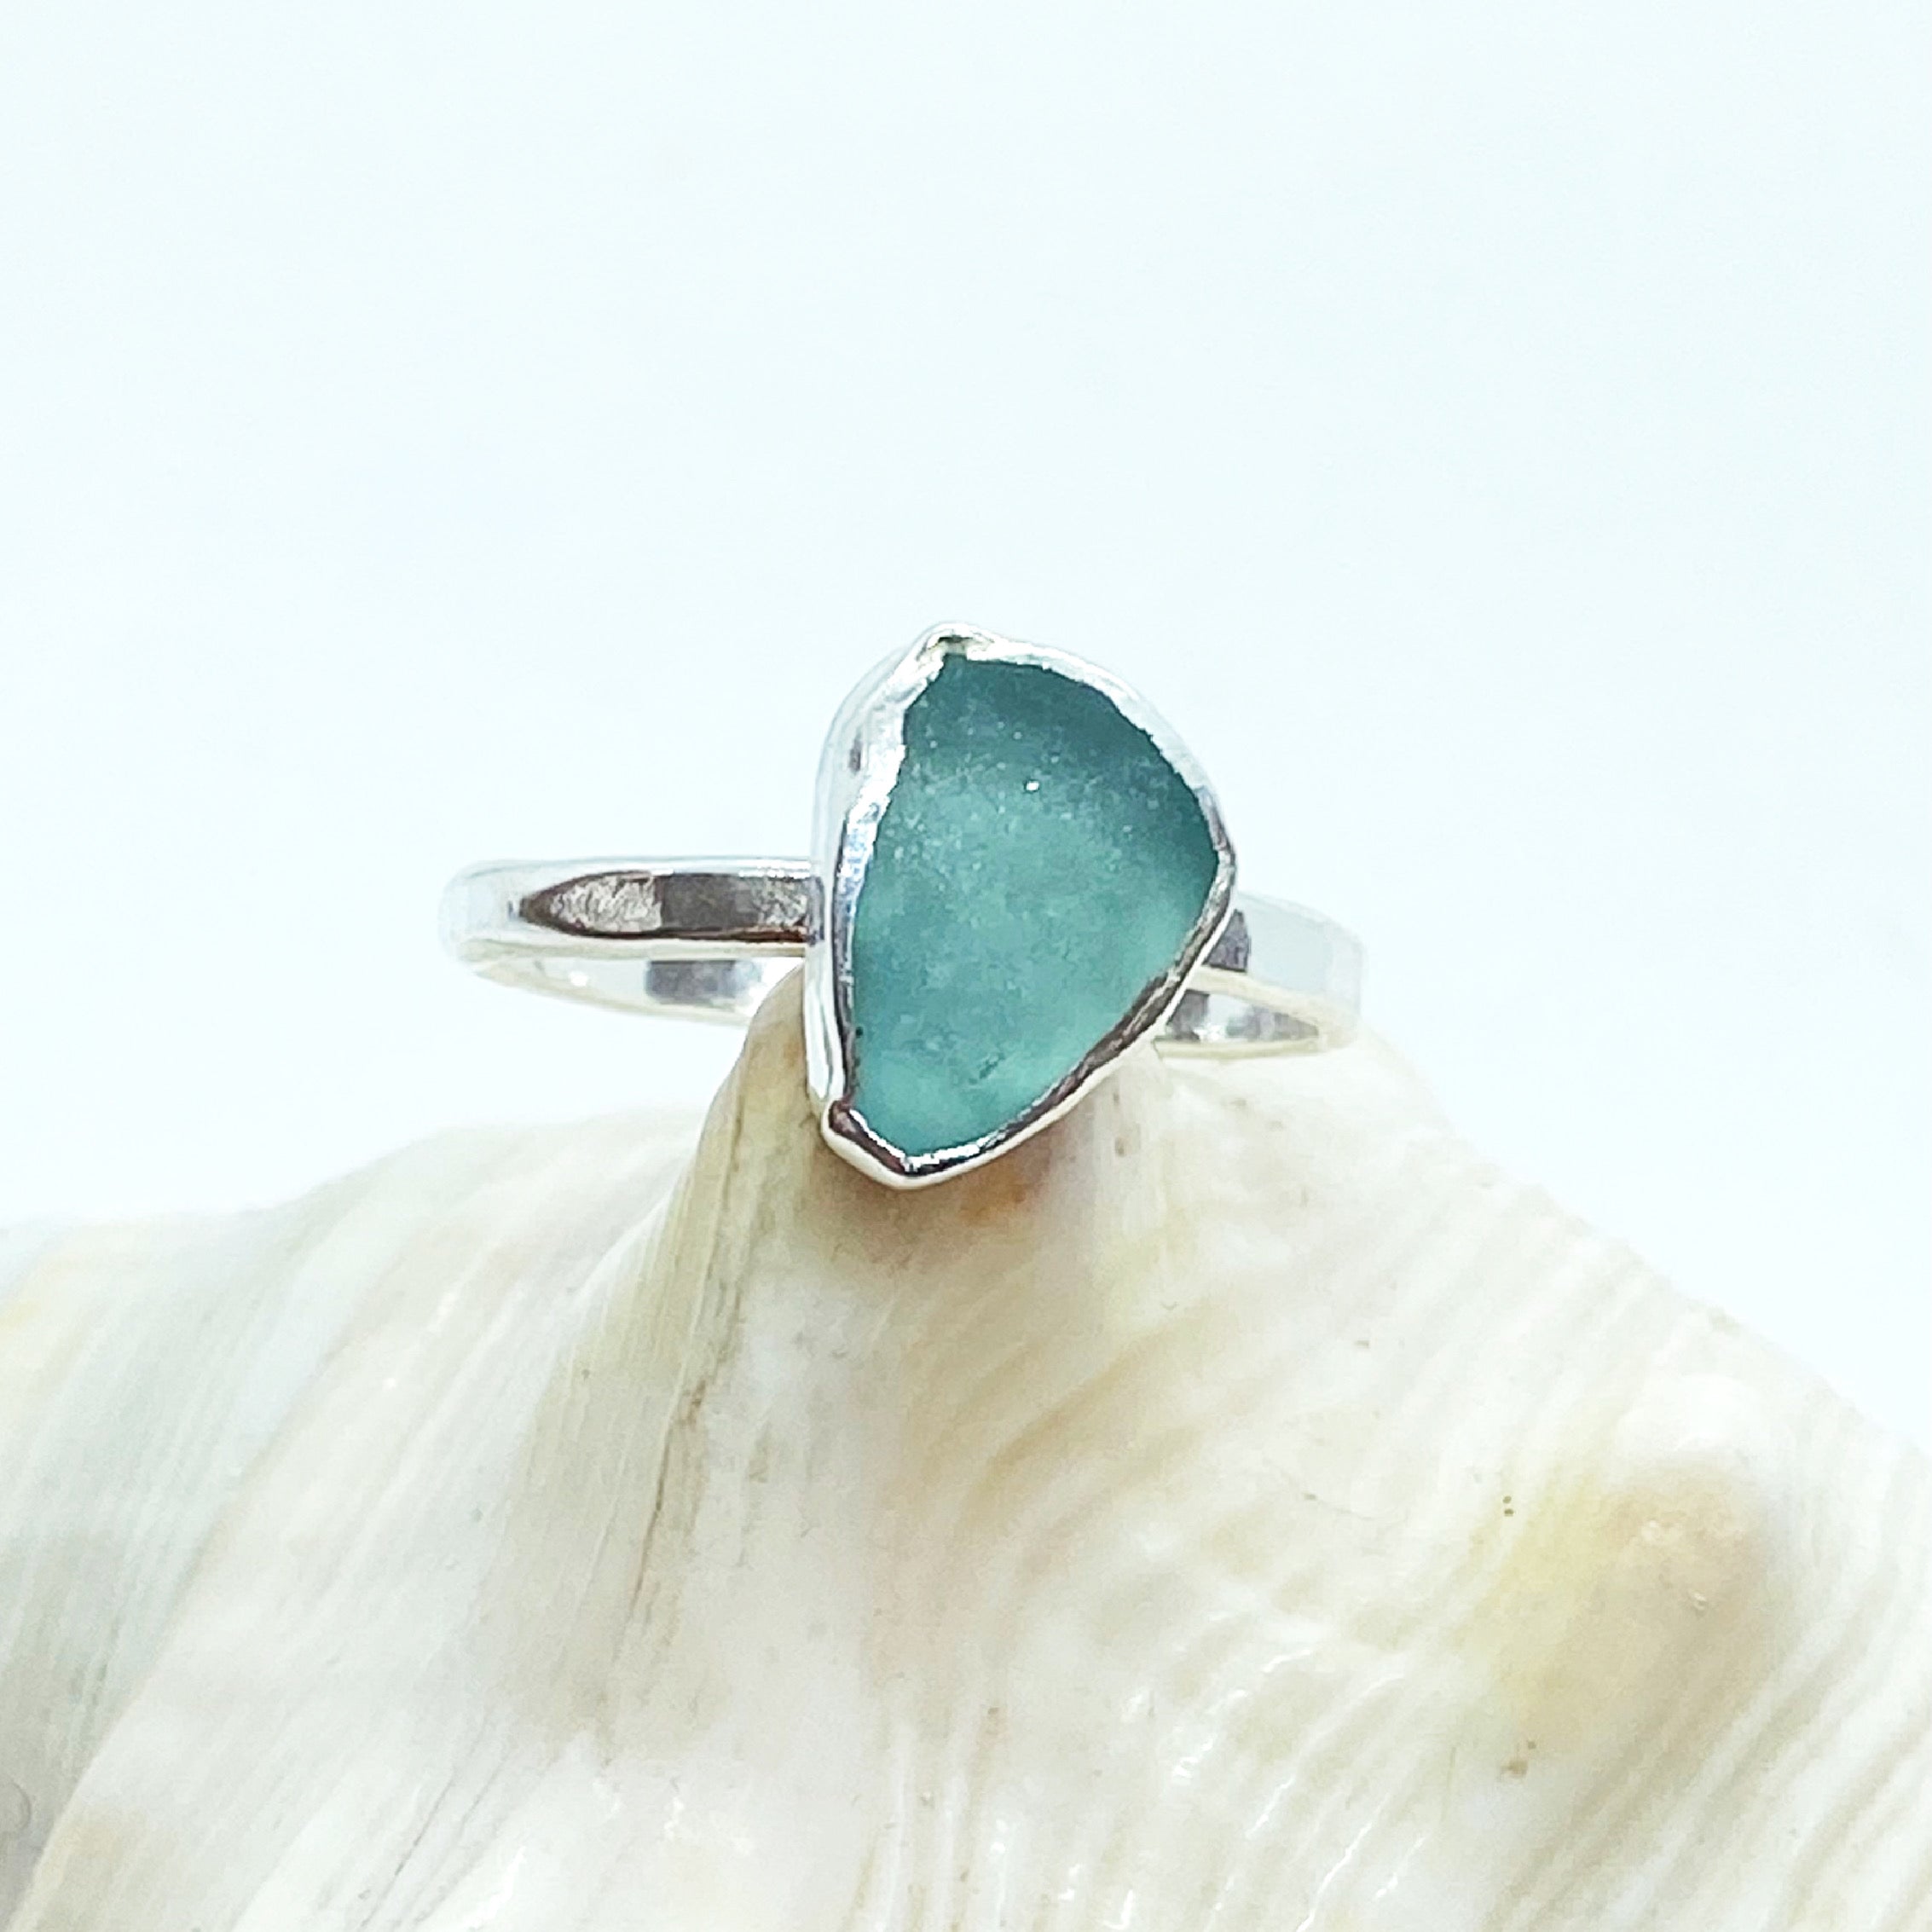 Blue Seaham Gemball Sea Glass Ring In Sterling Silver High Profile Setting  - Size 8 (SSRING20-17)